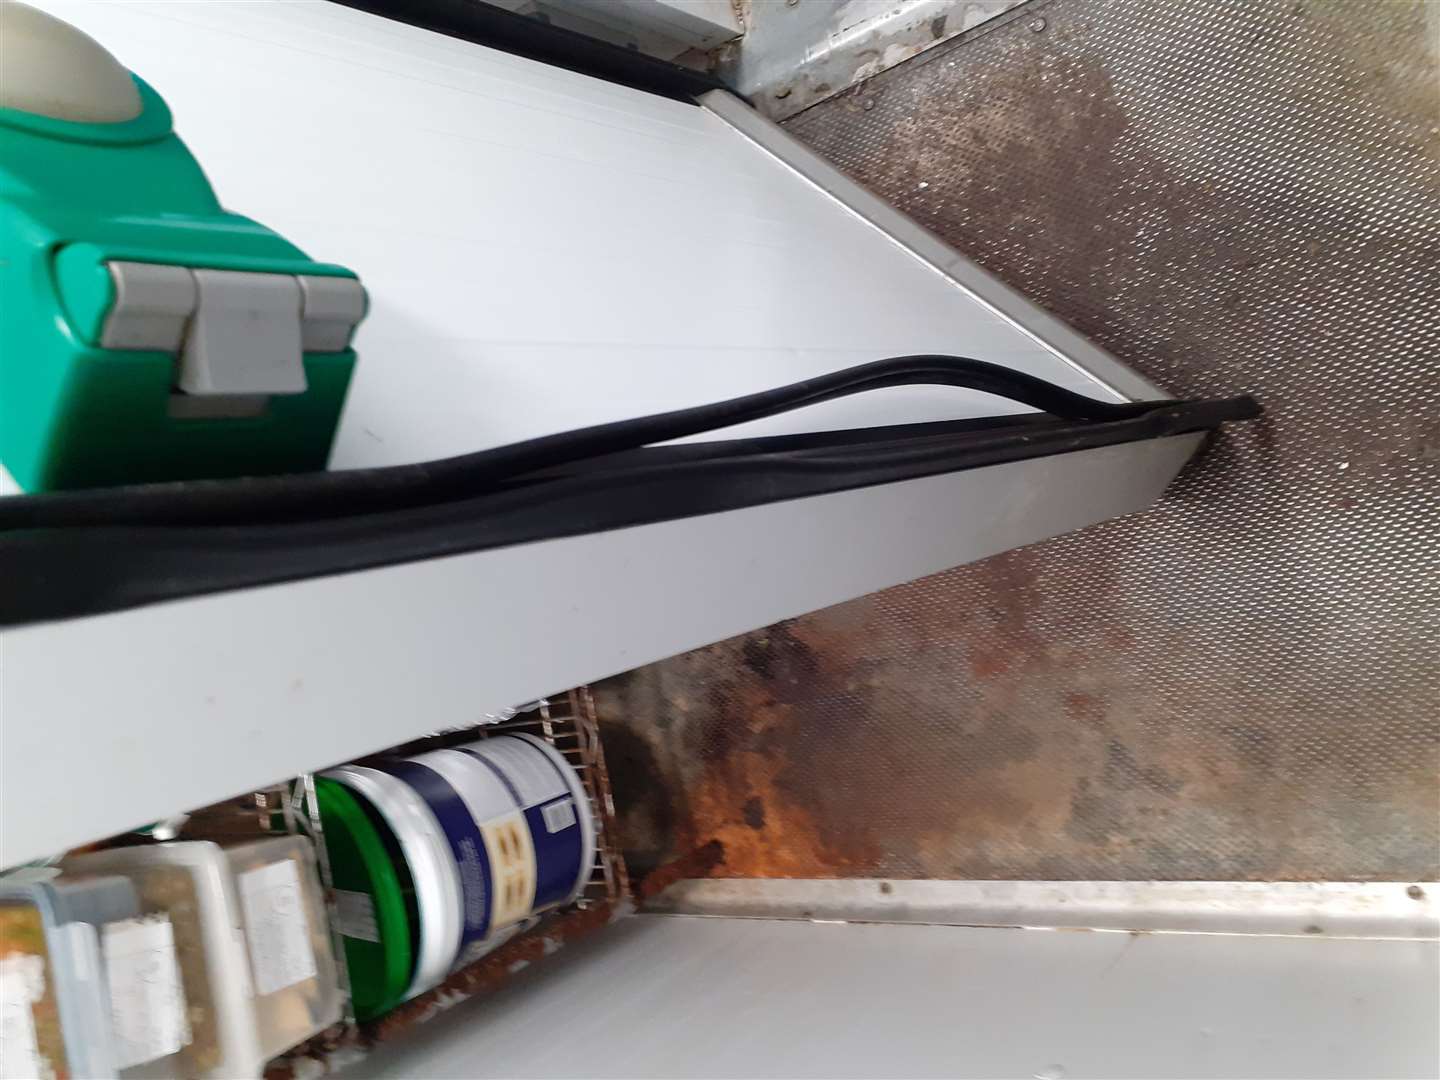 The broken seal to the inter fridge door. Picture: Picture: Gravesend Borough Council